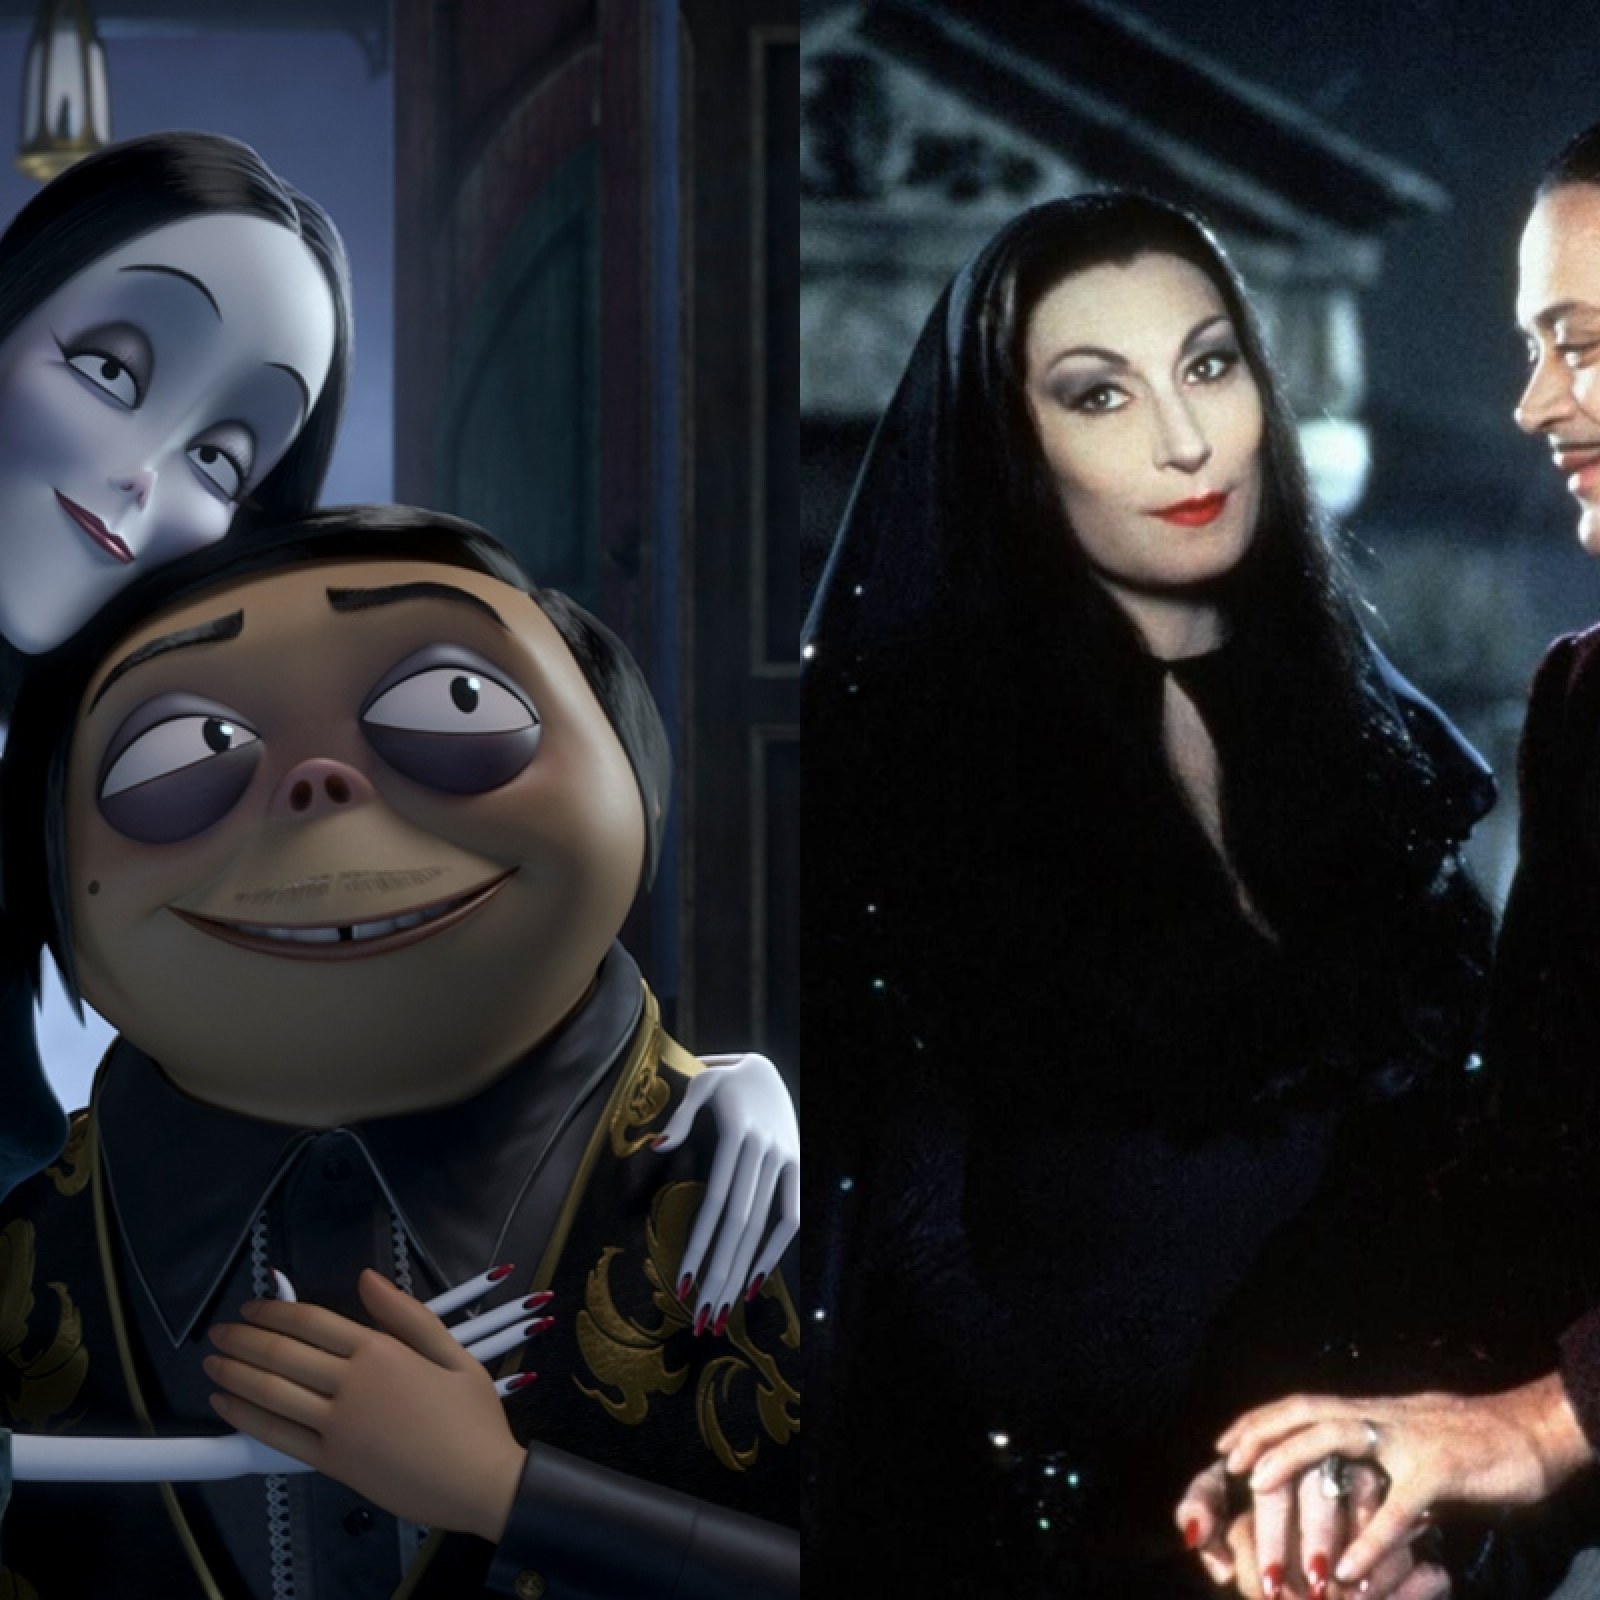 The Addams Family' Cast: Who Voices the Characters in the New Film?